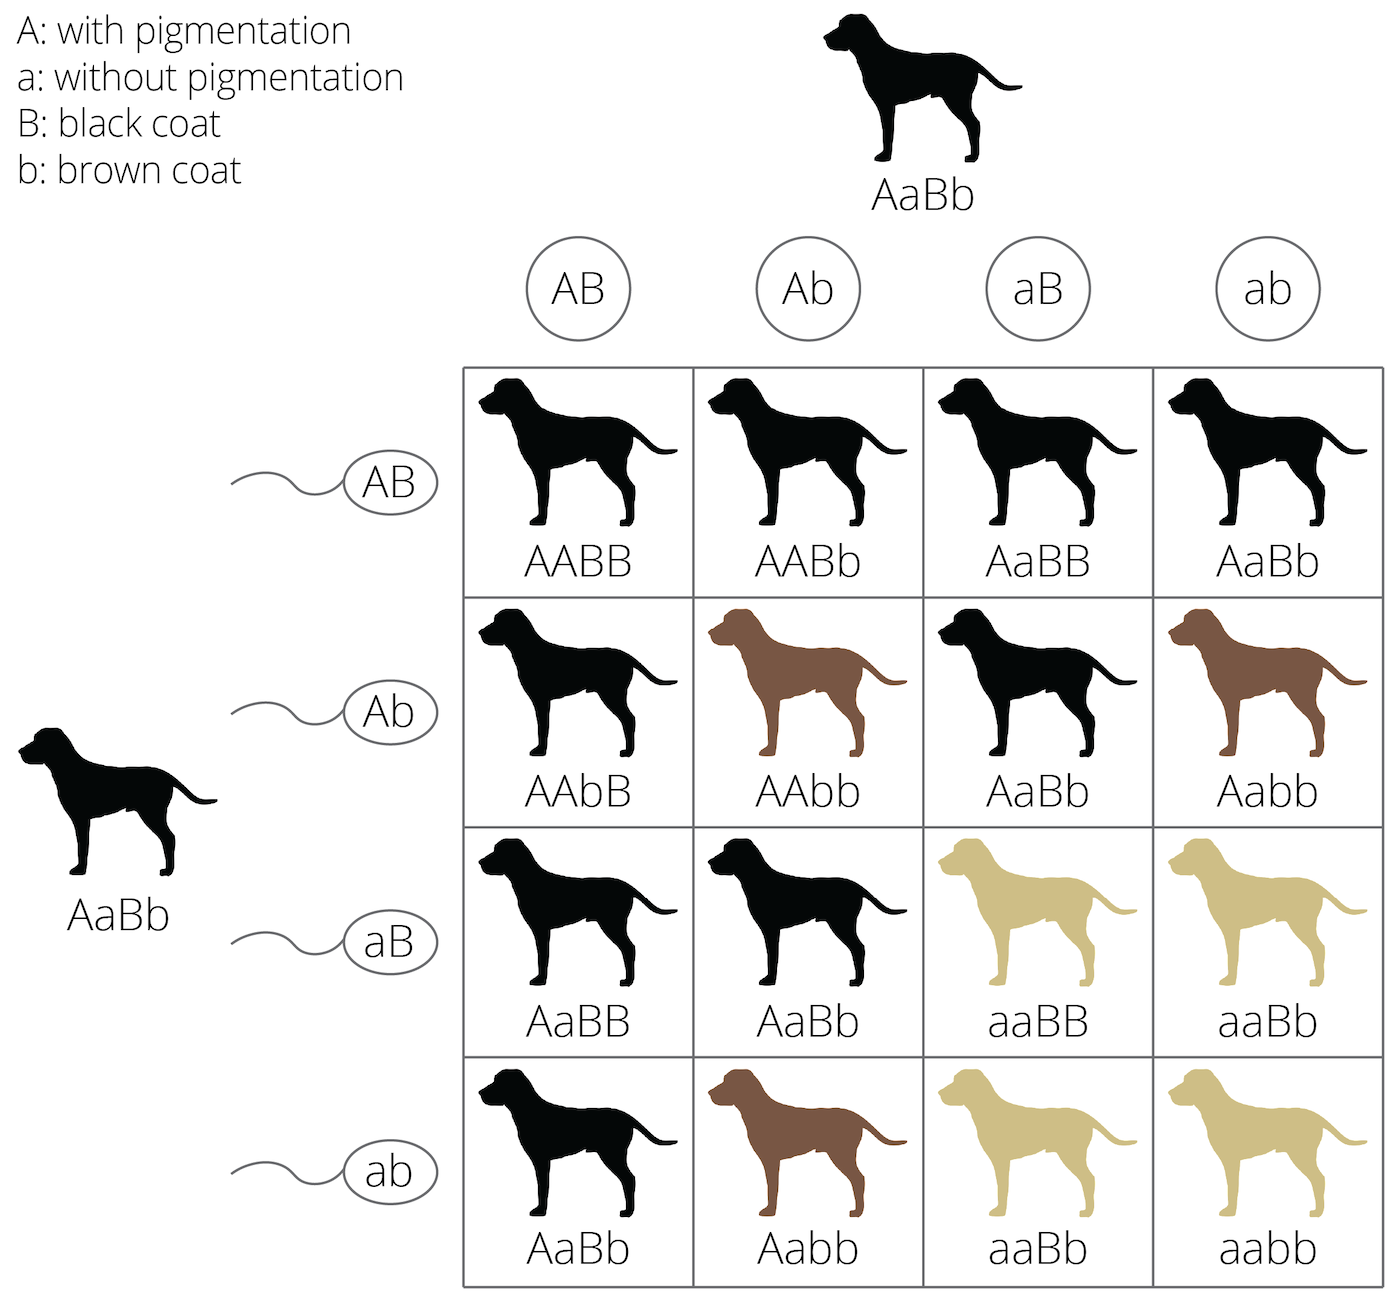 Example of epistasis in coat color genetics: If no pigments can be deposited, the other coat color genes have no effect on color expression, no matter if they would be dominant or recessive, and no matter if the individual is homozygous.